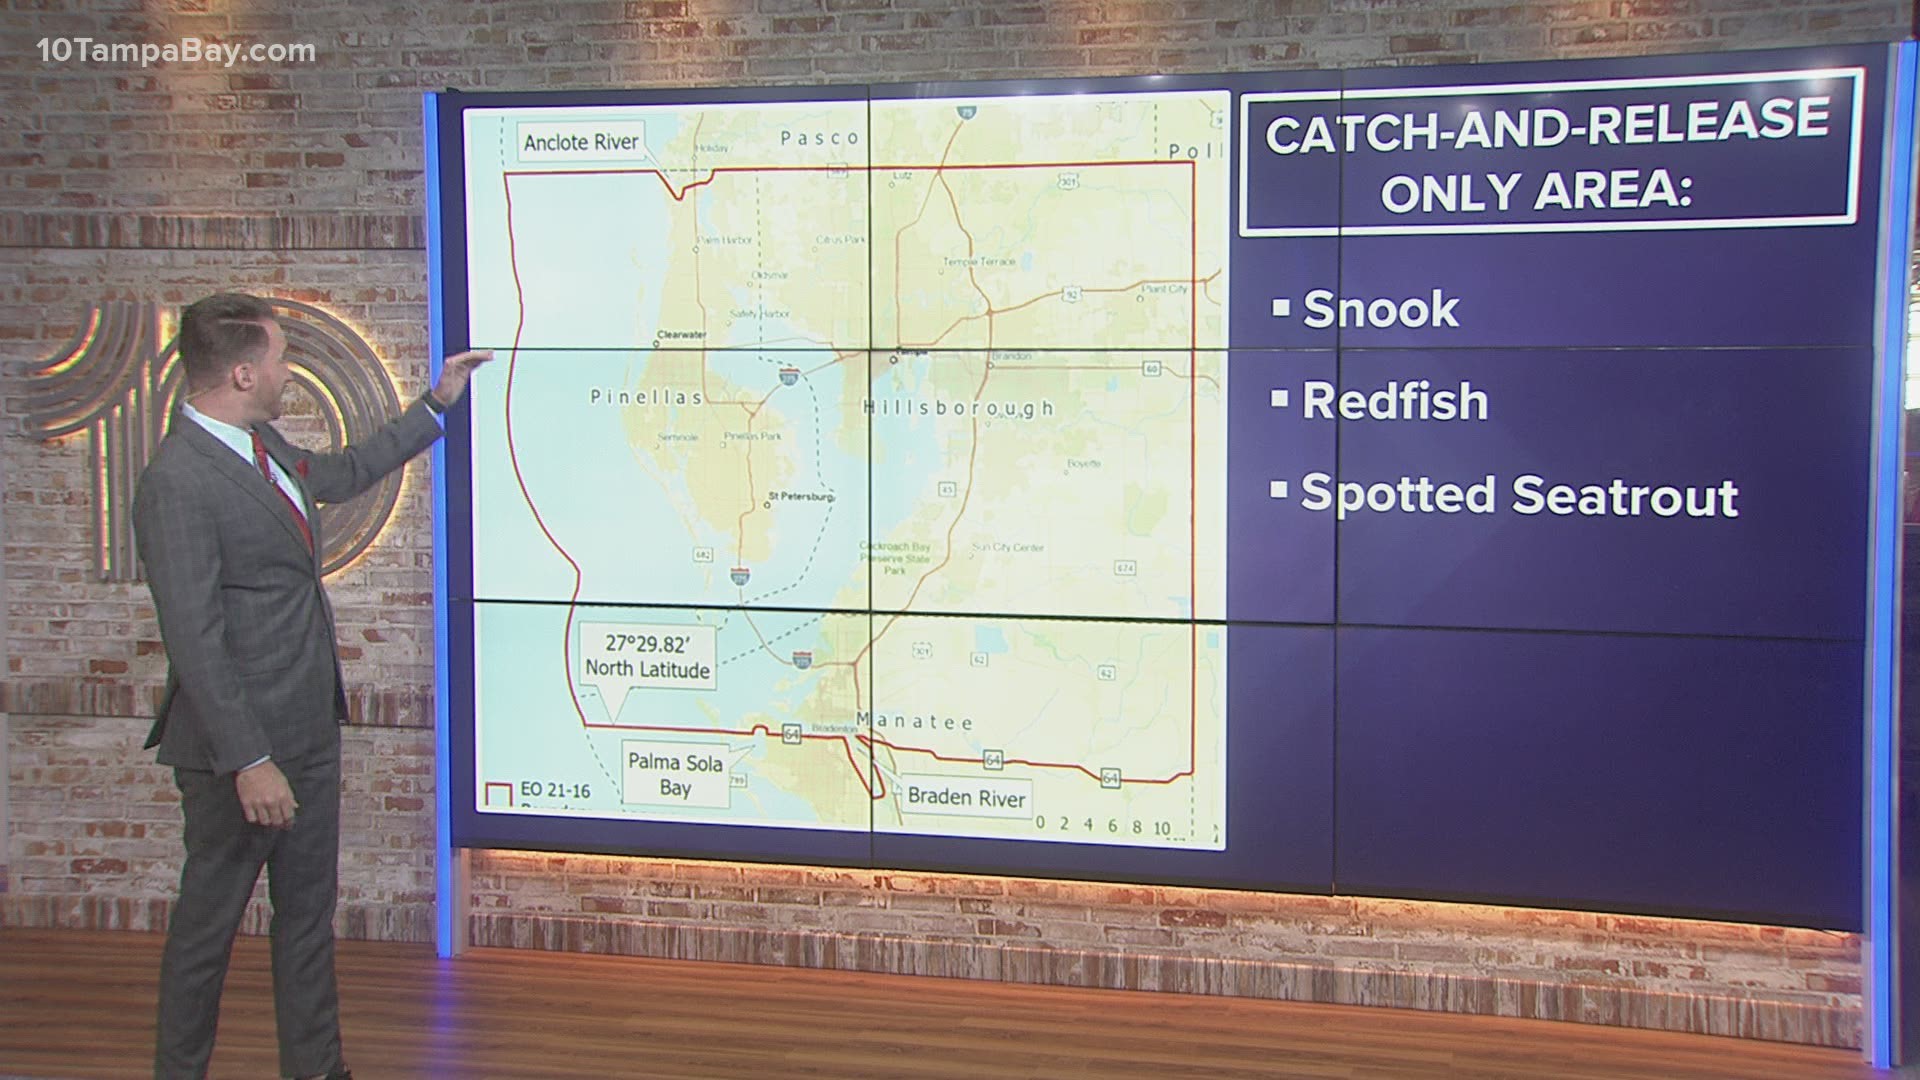 The catch-and-release restrictions begin Friday, July 16, and continue through Sep. 16.